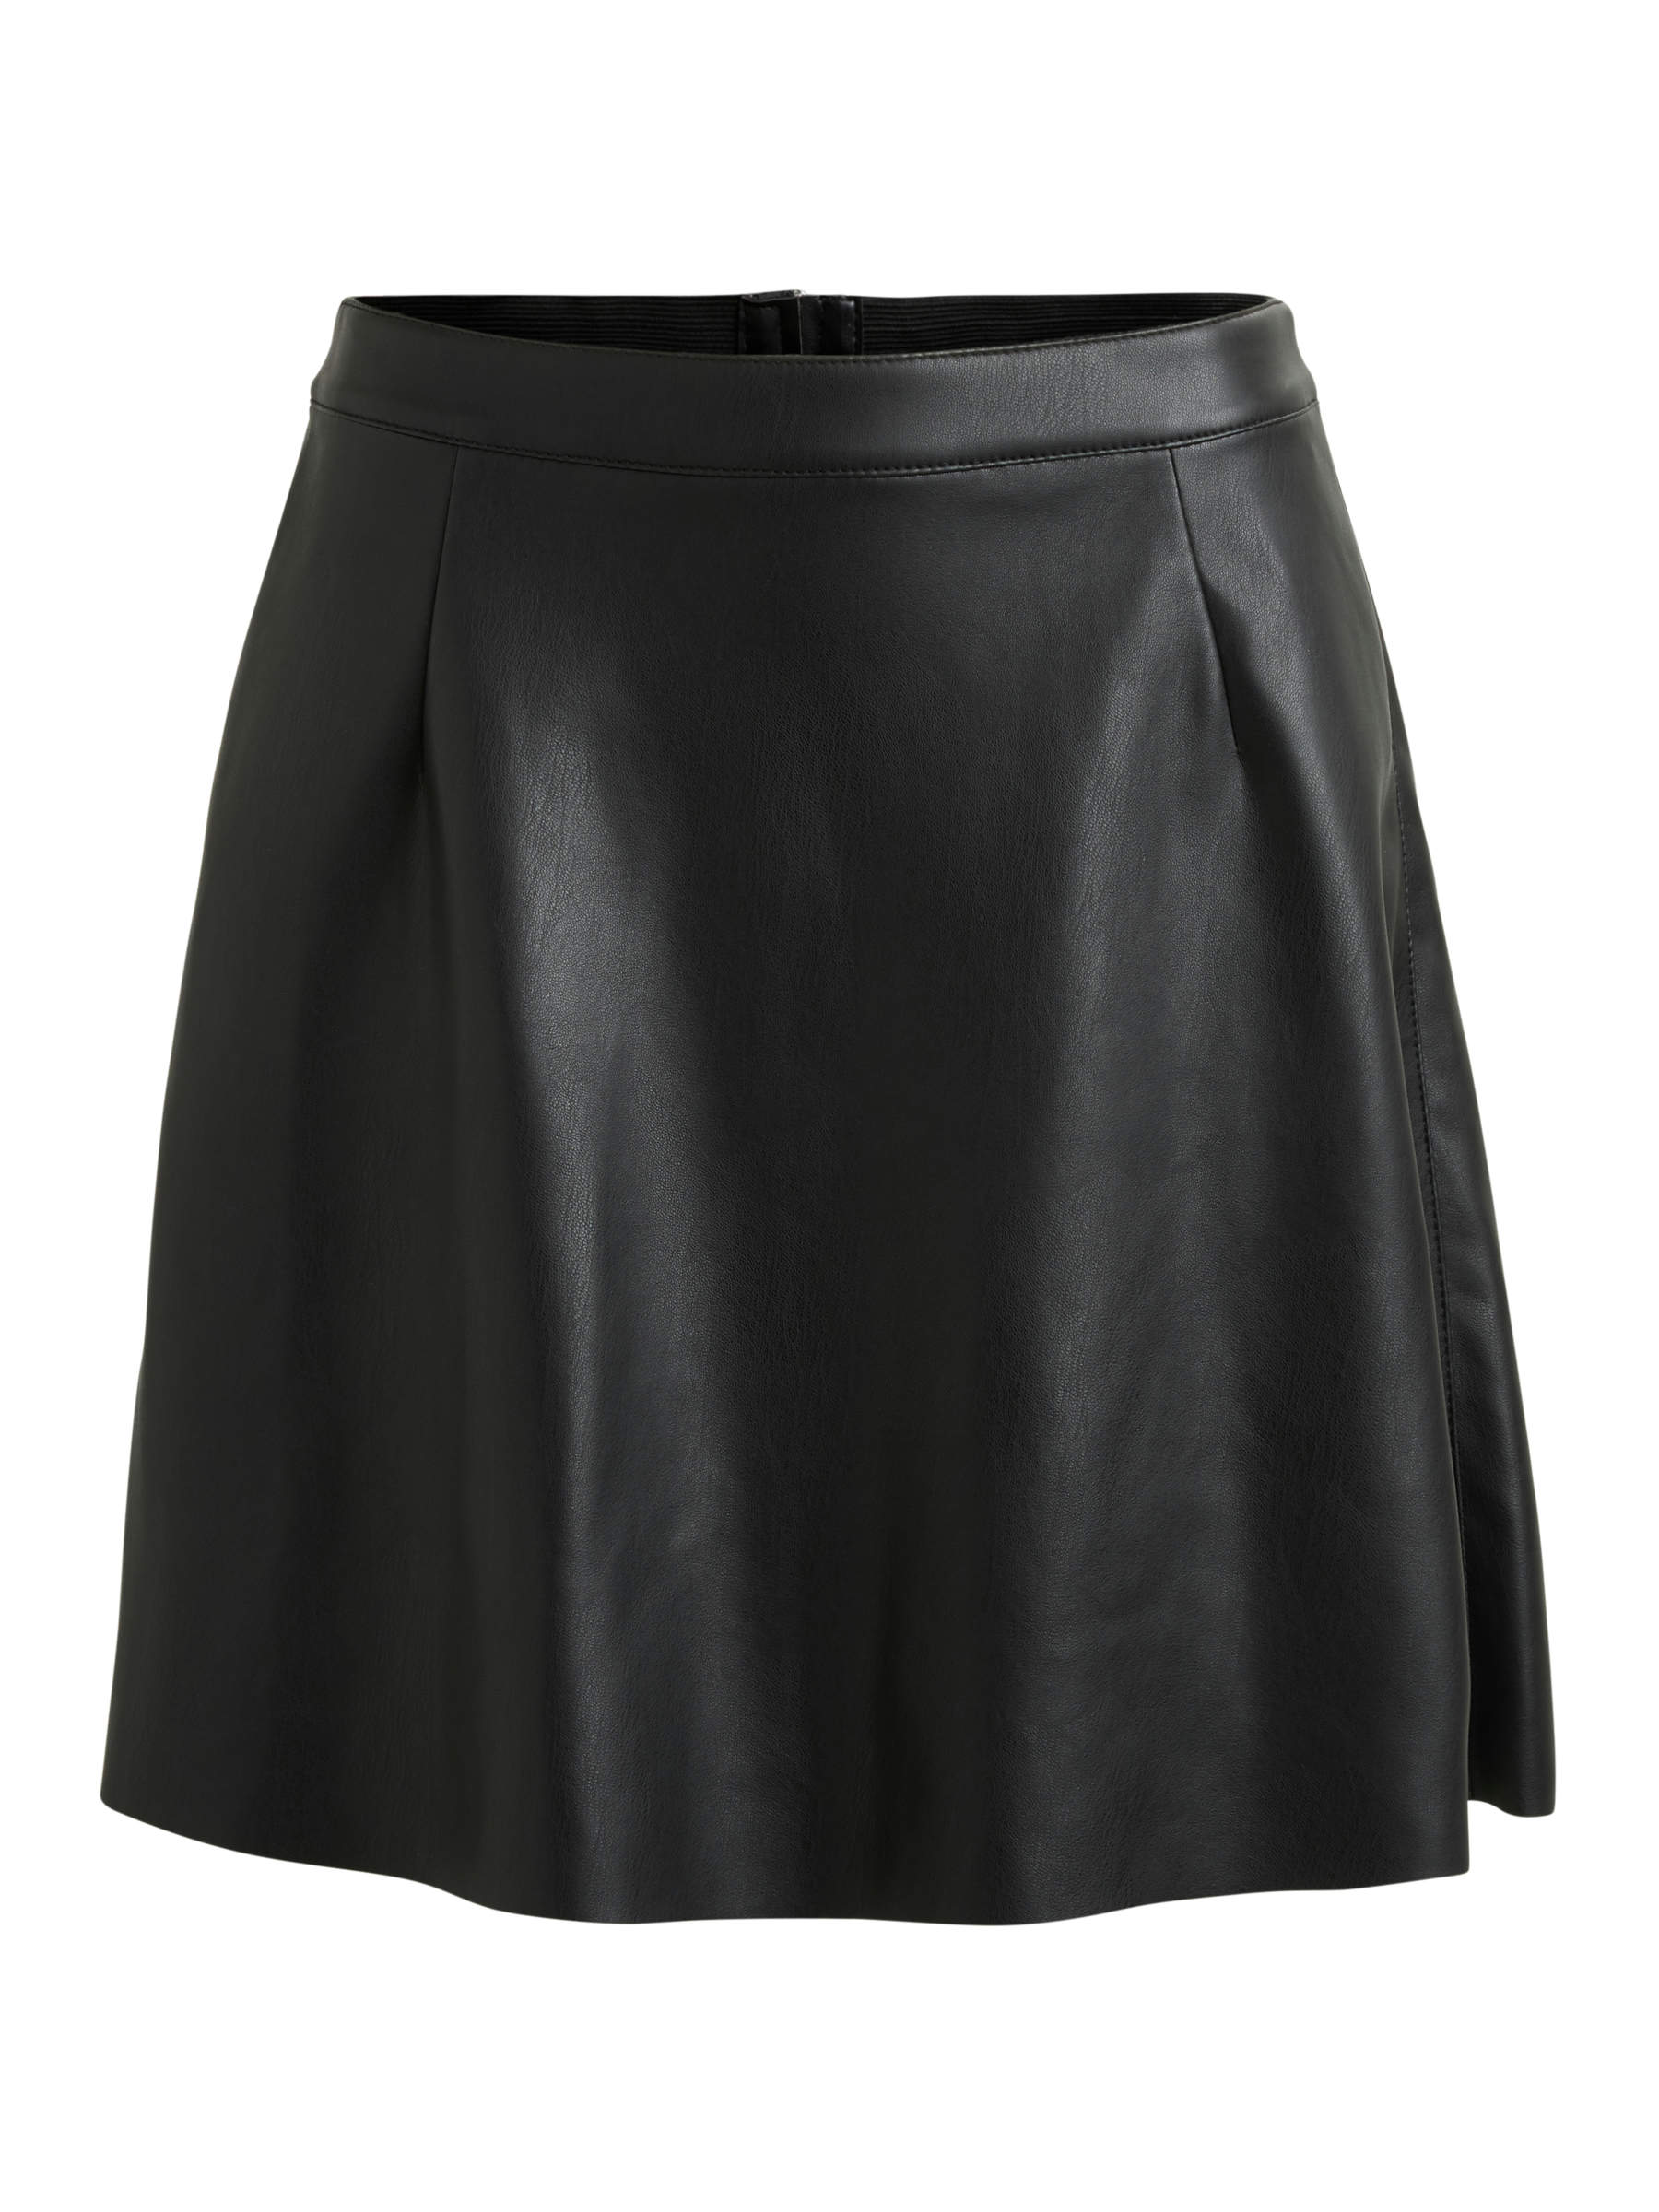 Amazon.com: Faux Leather Pleated Skirt Women Black Leather Skirt High Waist  A Line Mini Skirt Casual Skater Skirts Solid PU Faux Leather Pleated Skirt  Holographic Skater Skirt Falda de Cuero Negro Black